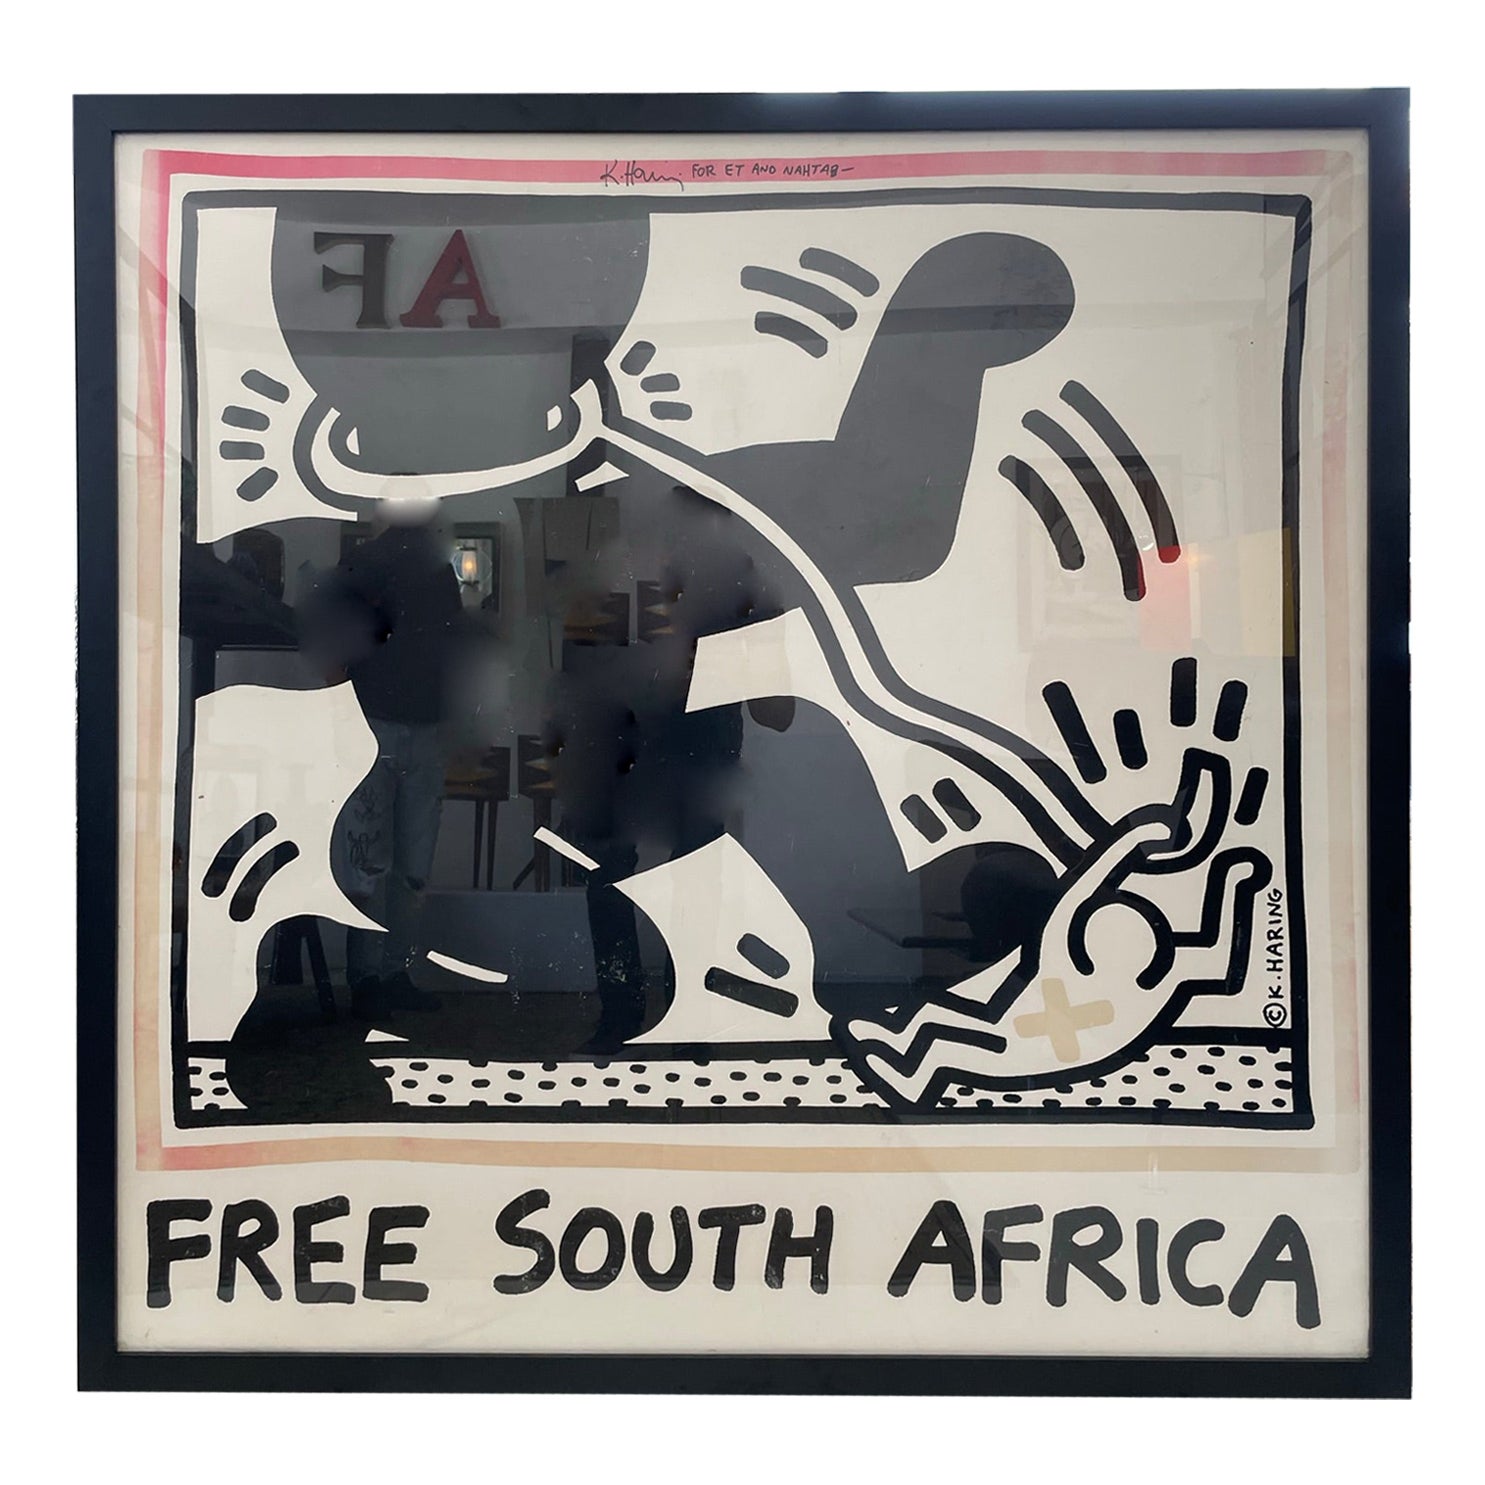 "Free South Africa" by Keith Haring